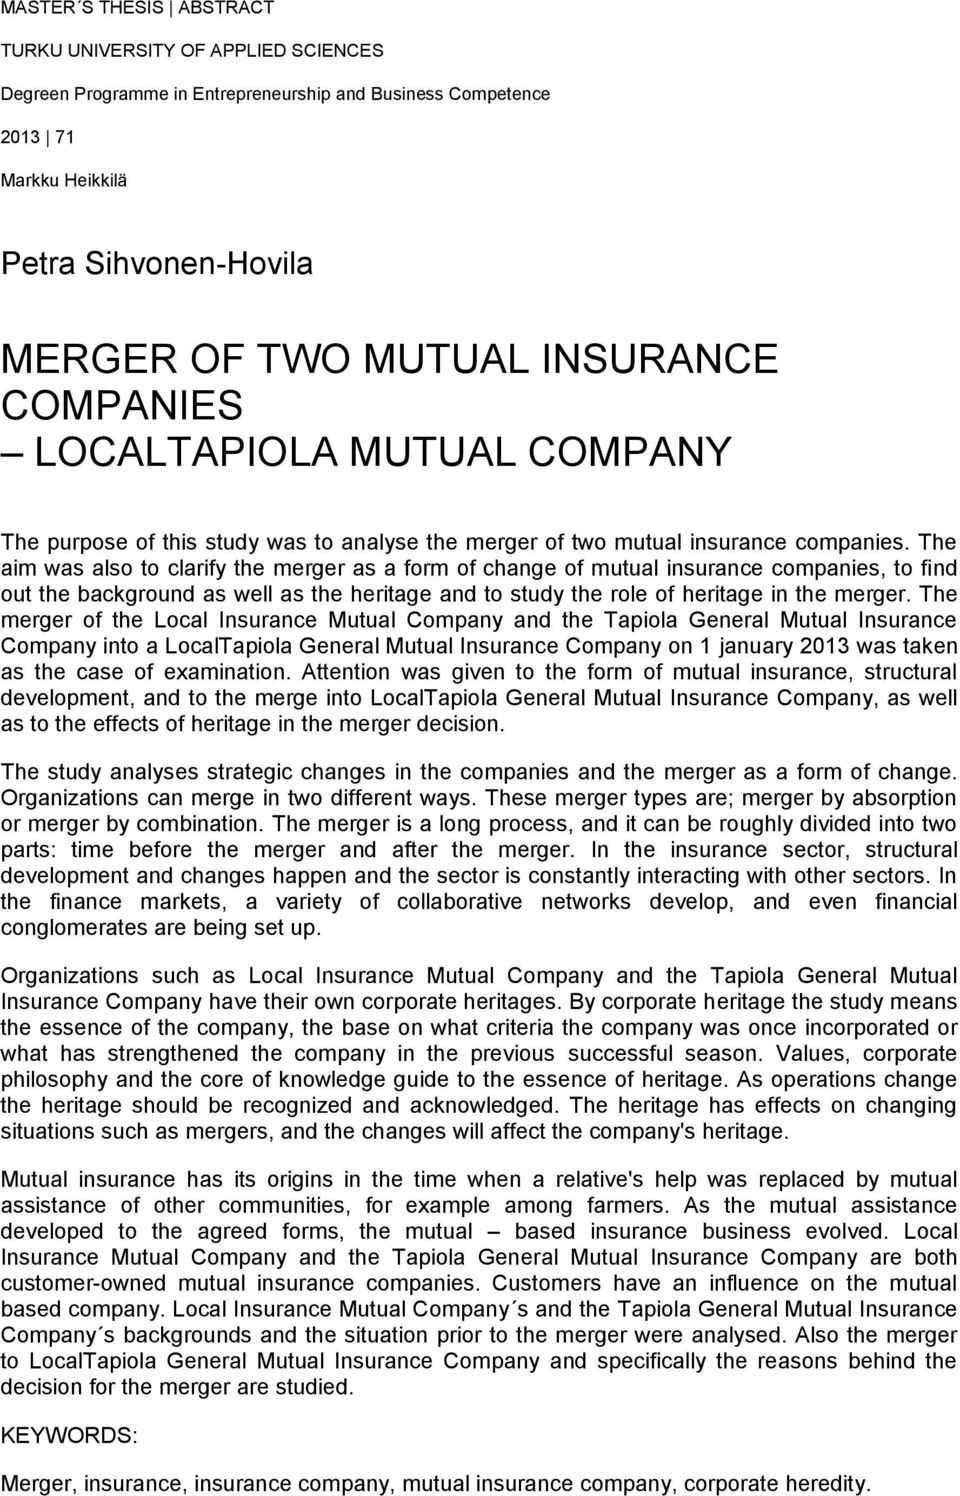 The aim was also to clarify the merger as a form of change of mutual insurance companies, to find out the background as well as the heritage and to study the role of heritage in the merger.